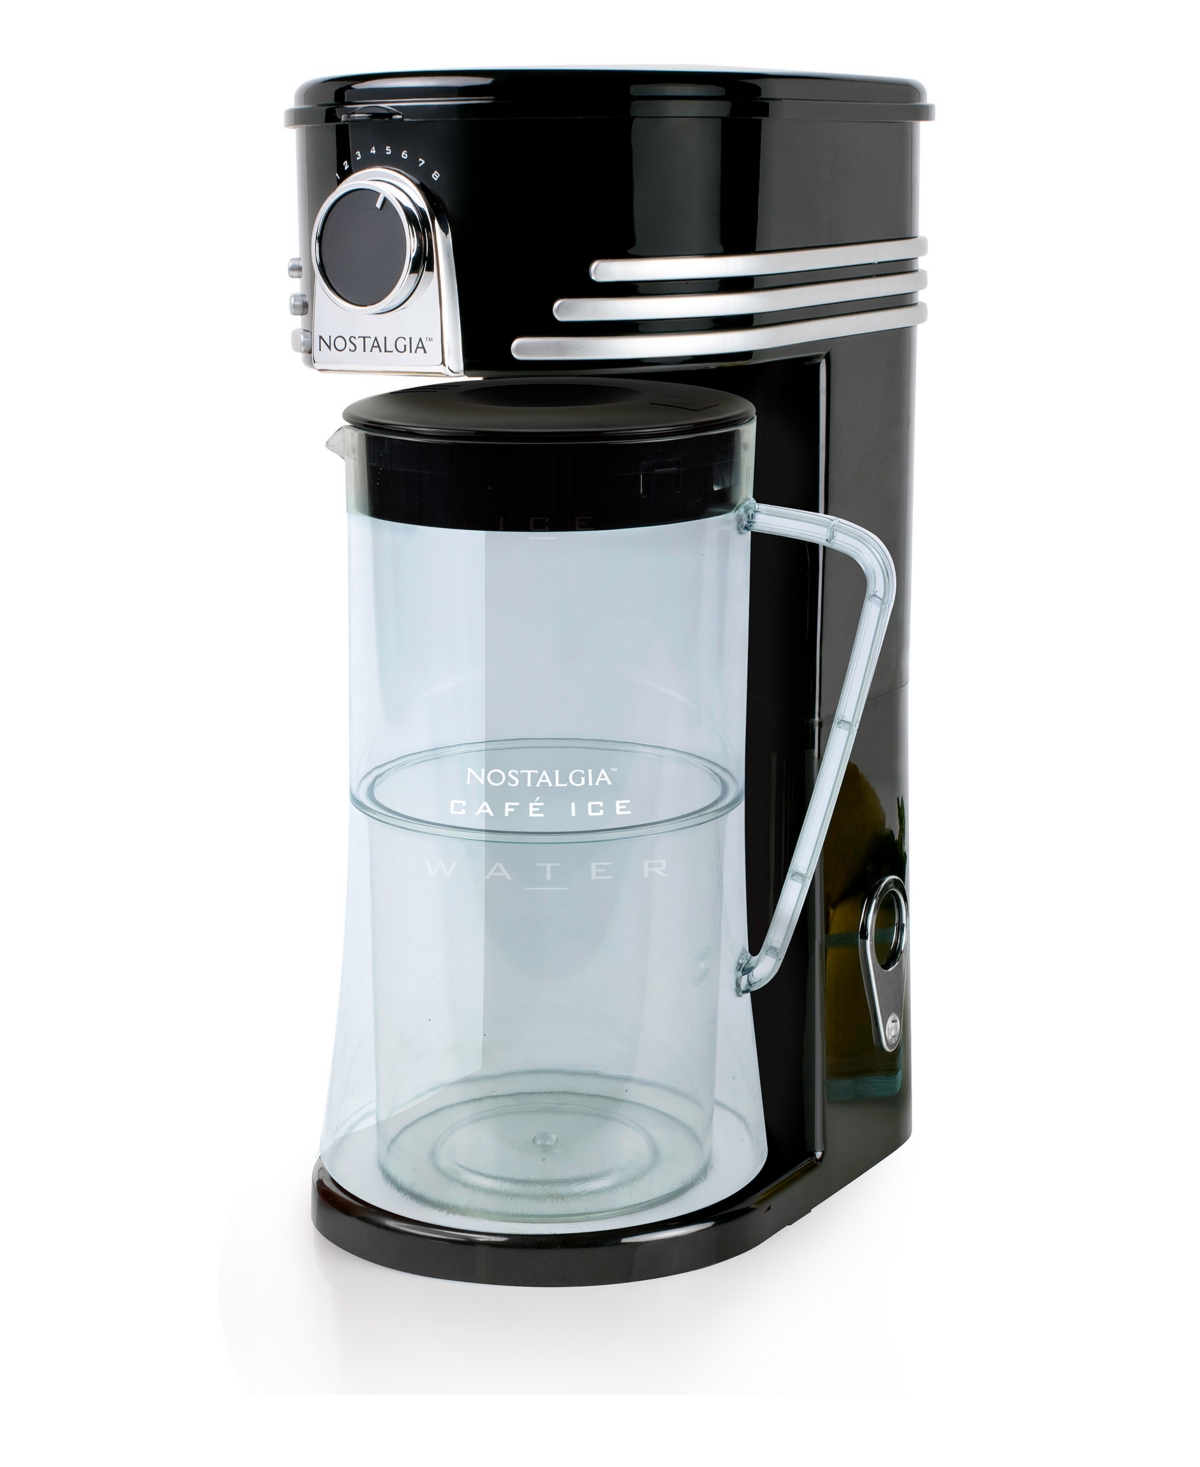 Nostalgia Cafe Ice 3 Quart Iced Coffee And Tea Brewing System With Plastic Pitcher In Black